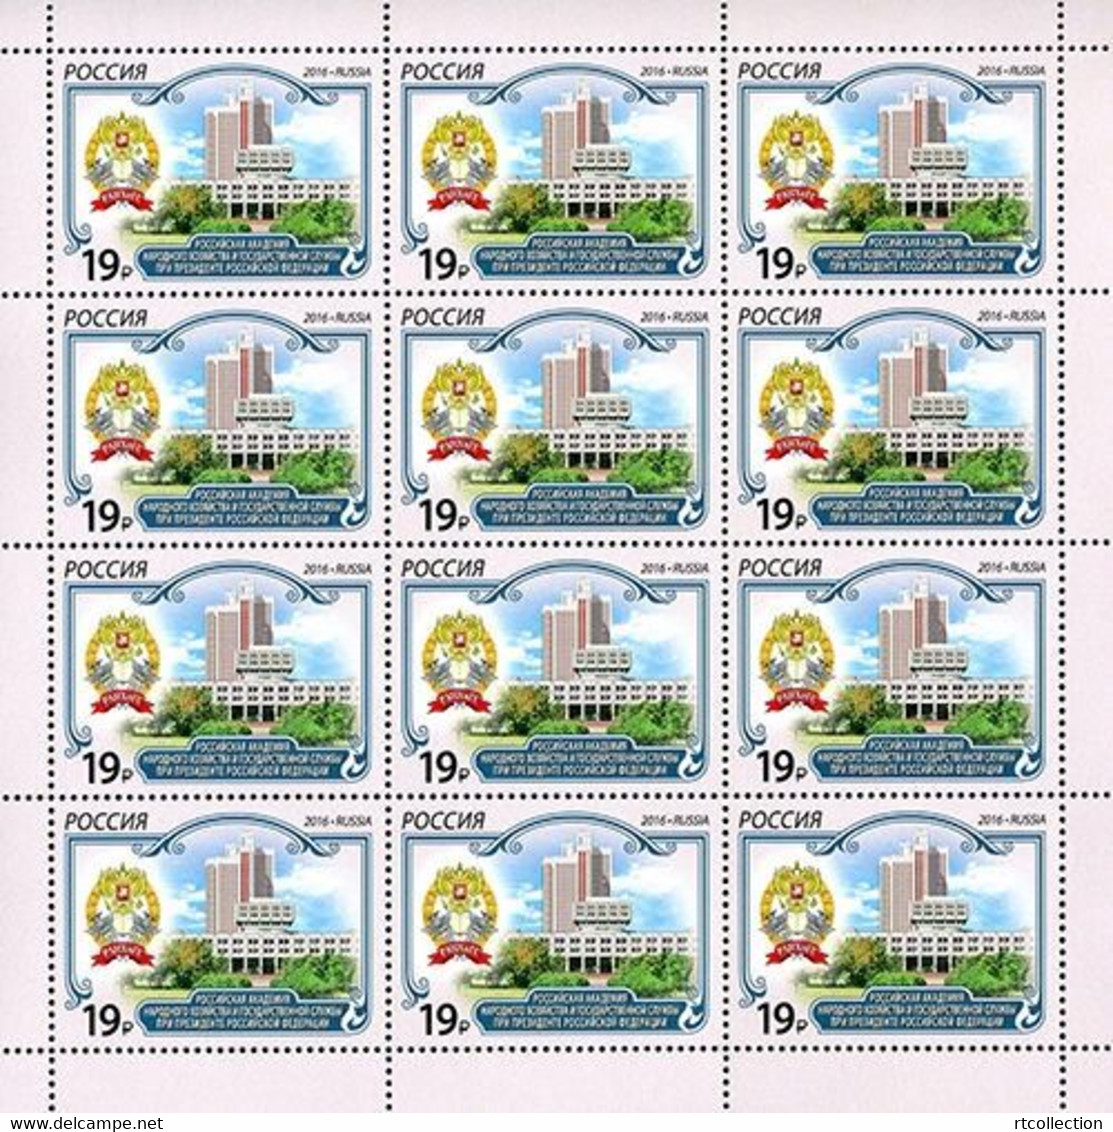 Russia 2016 Sheet Presidential Academy Economy Public Administration Architecture Buidling Geography Places Stamps - Full Sheets